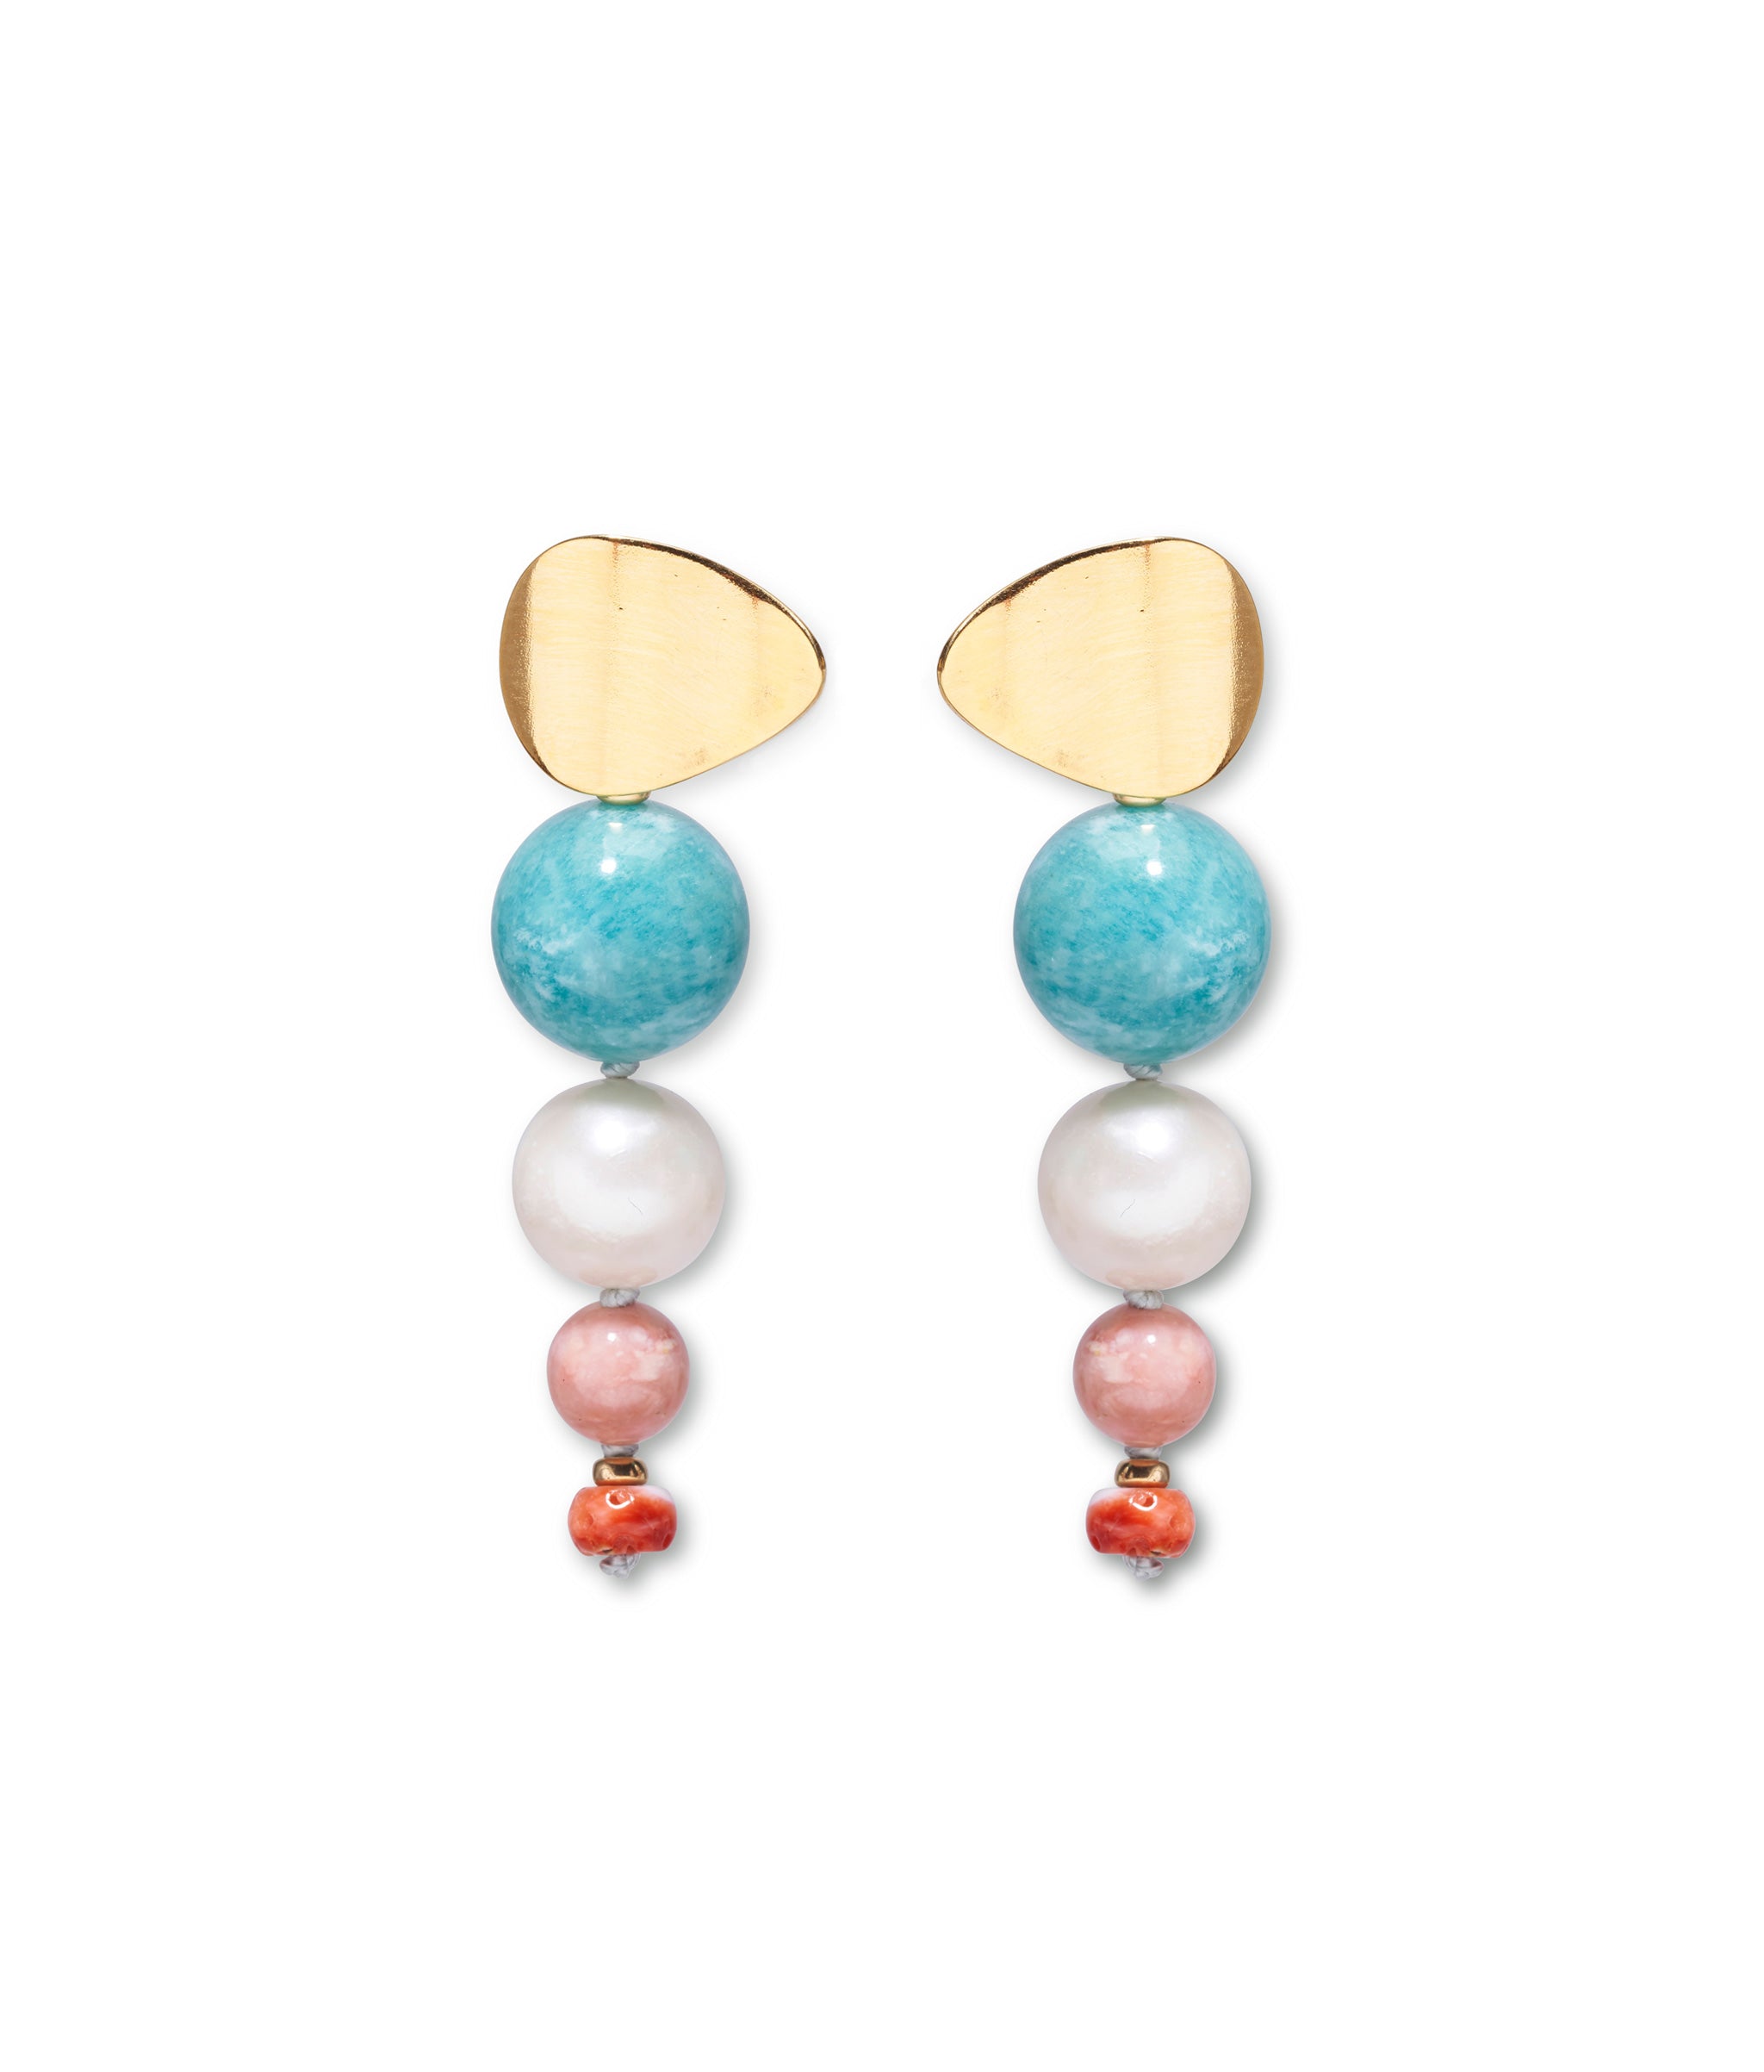 Pego Earrings. With gold-plated teardrop tops and graduated beads in amazonite, pearl, pink opal, and spiny oyster.